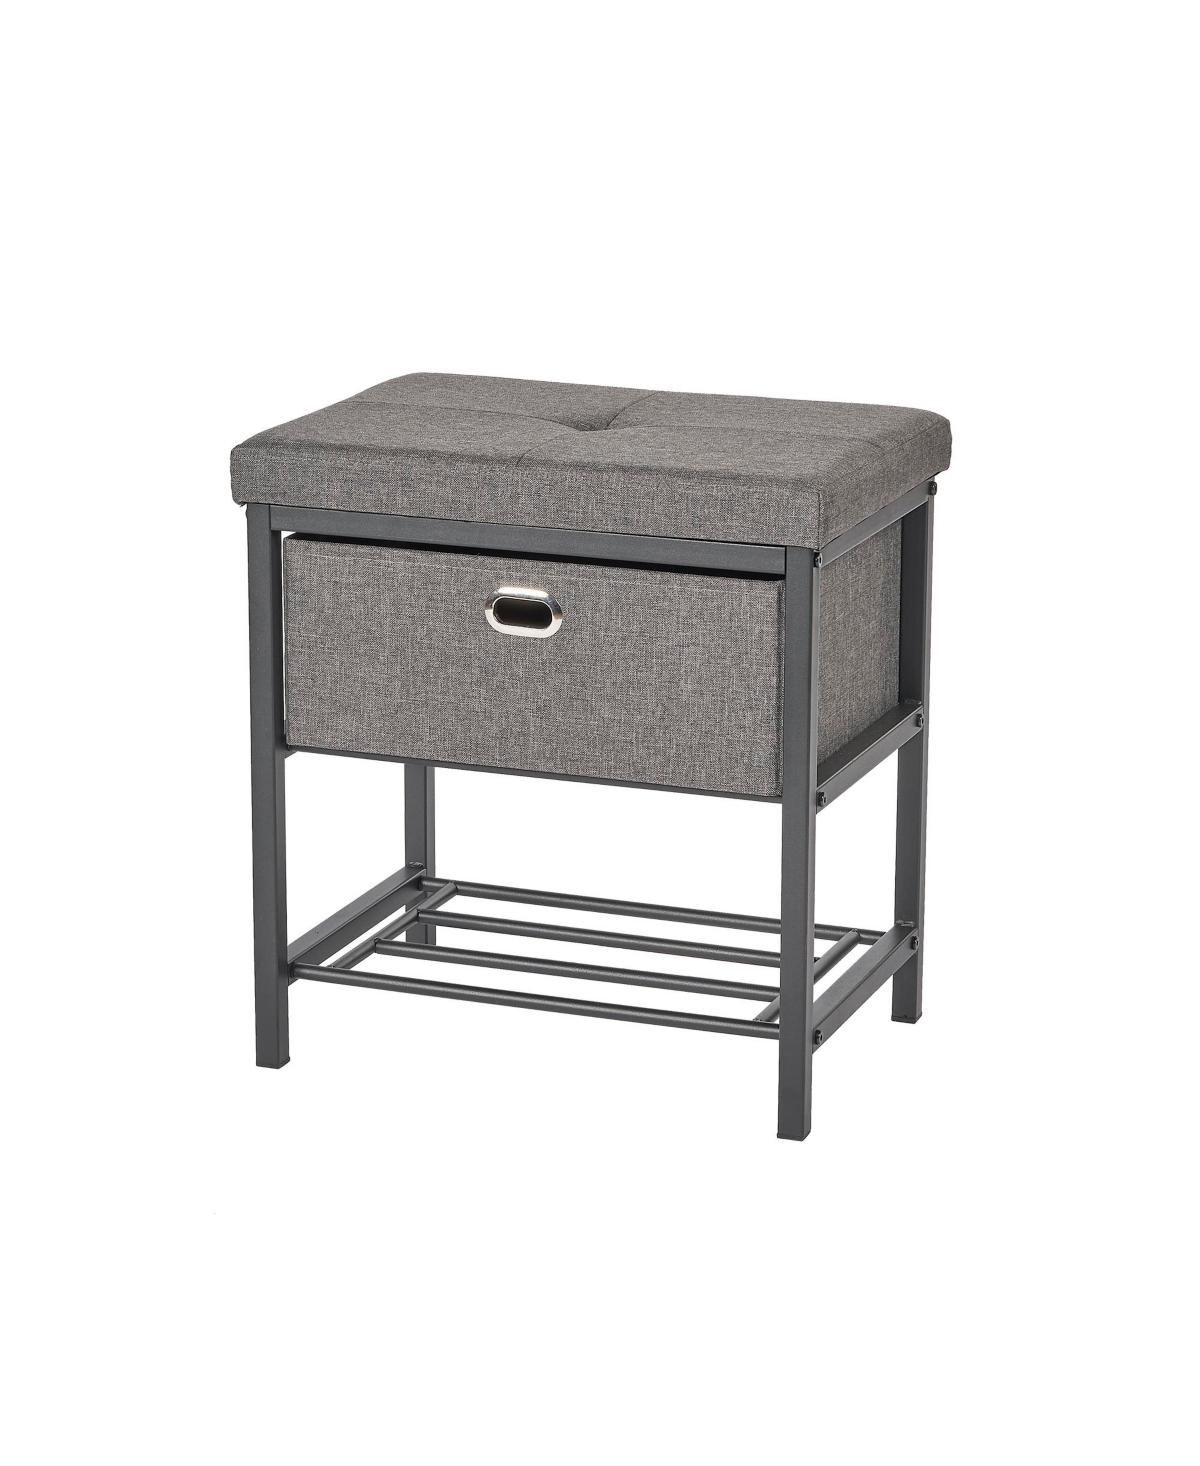 Single Seat Bench with Drawer - Gray